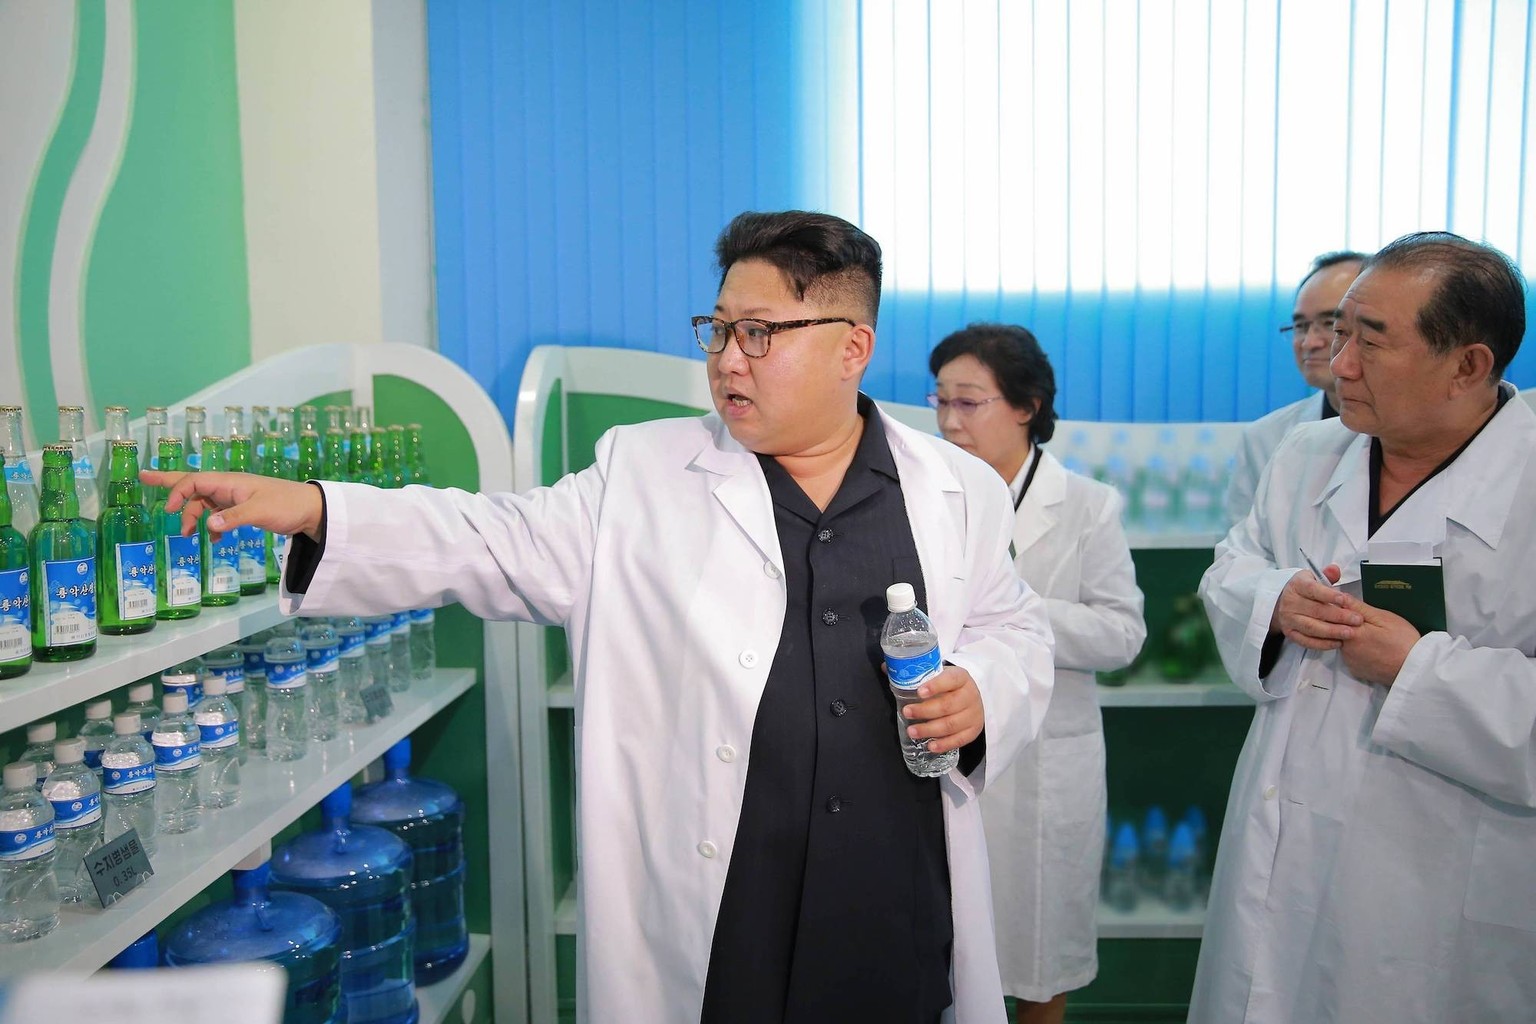 Bilder des Tages Kim Jong Un besucht Mineralwasserfabrik in Pjˆngjang (160930) -- PYONGYANG, Sept. 30, 2016 -- Photo provided by Korean Central News Agency () on Sept. 30, 2016 shows top leader of the ...